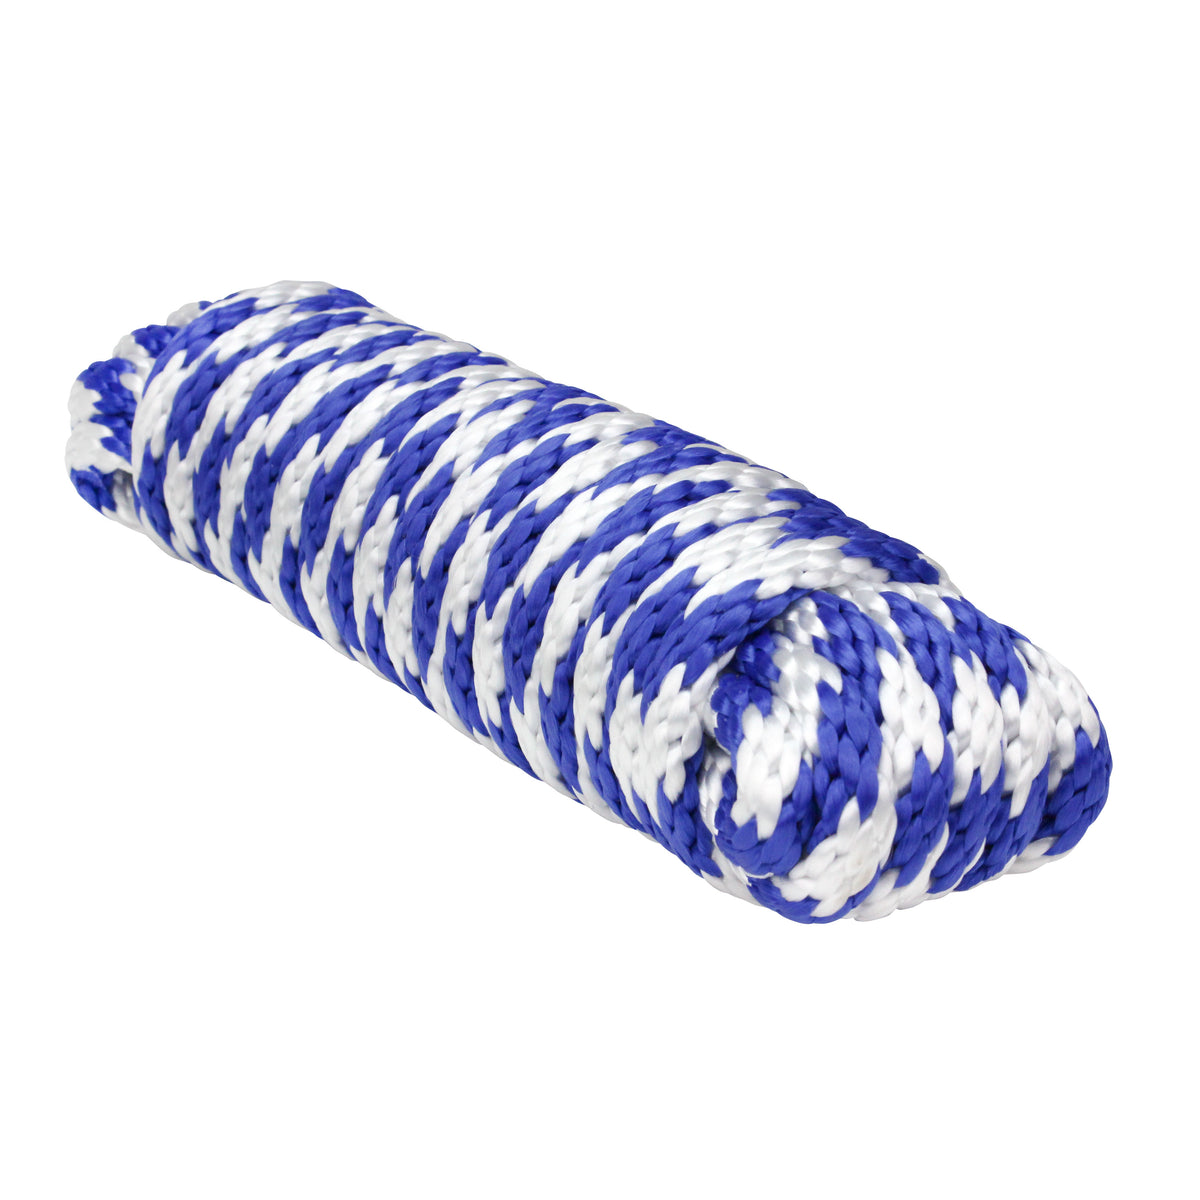 Extreme Max 3008.0193 Solid Braid MFP Utility Rope - 1/4" x 10', Blue/White